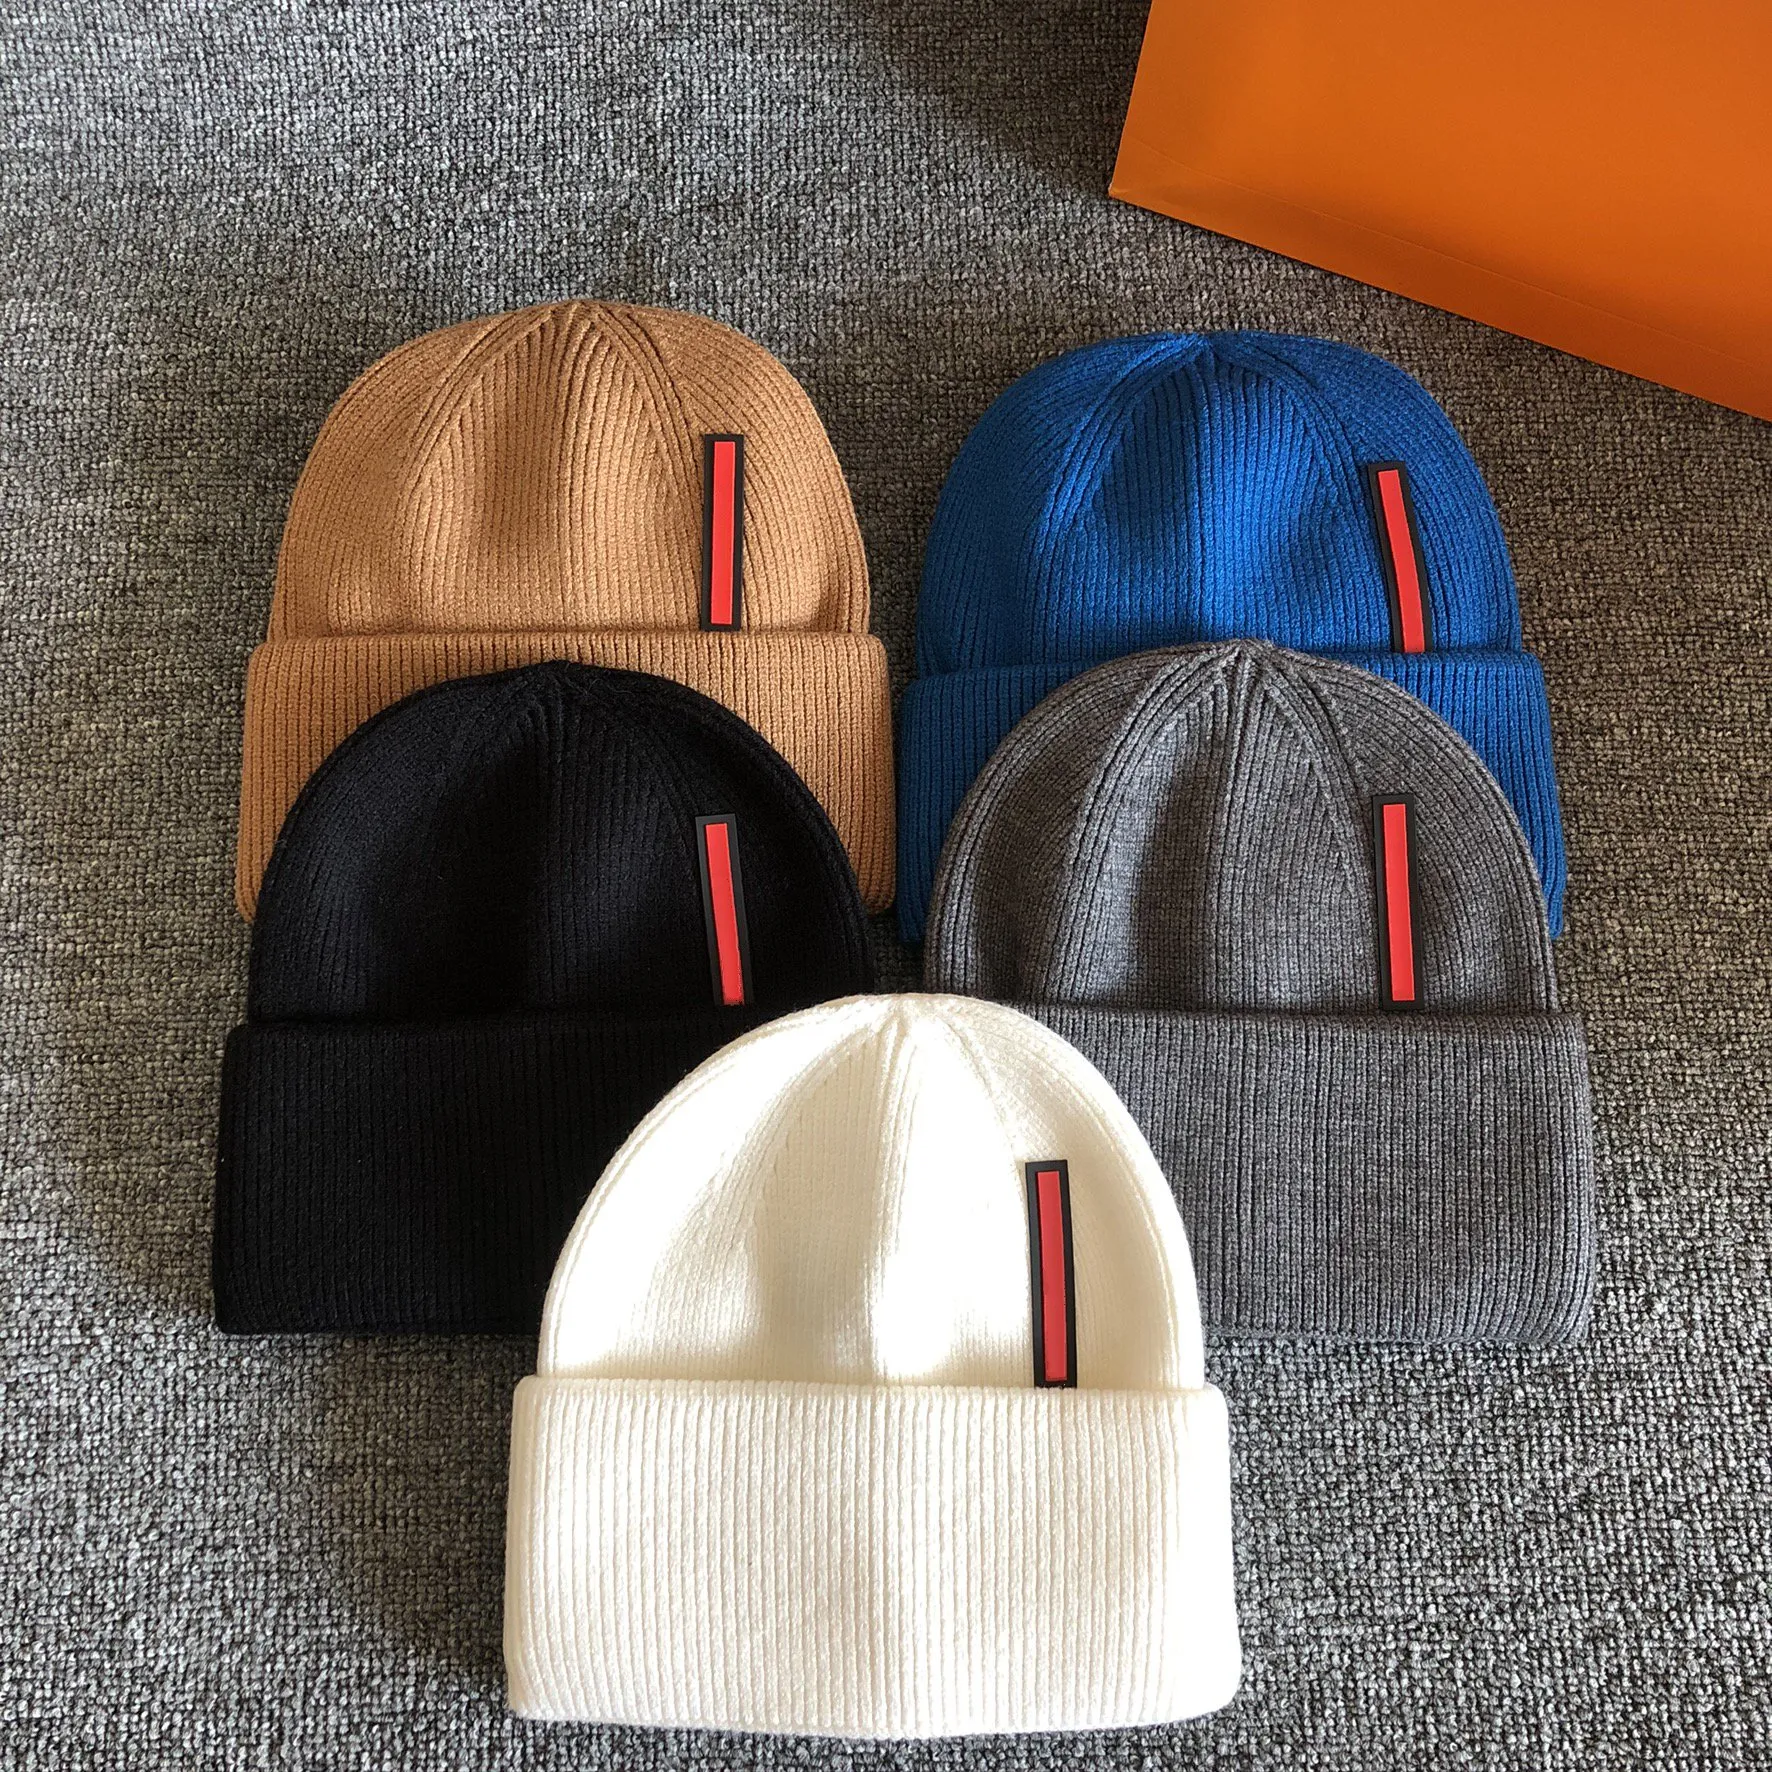 Wholesale Designer Beanie hat Quality Fashion Cashmere Knitted cap Men women Snapback Caps Mask Fitted Unisex Classic Winter Casual Outdoor Fashion Hats